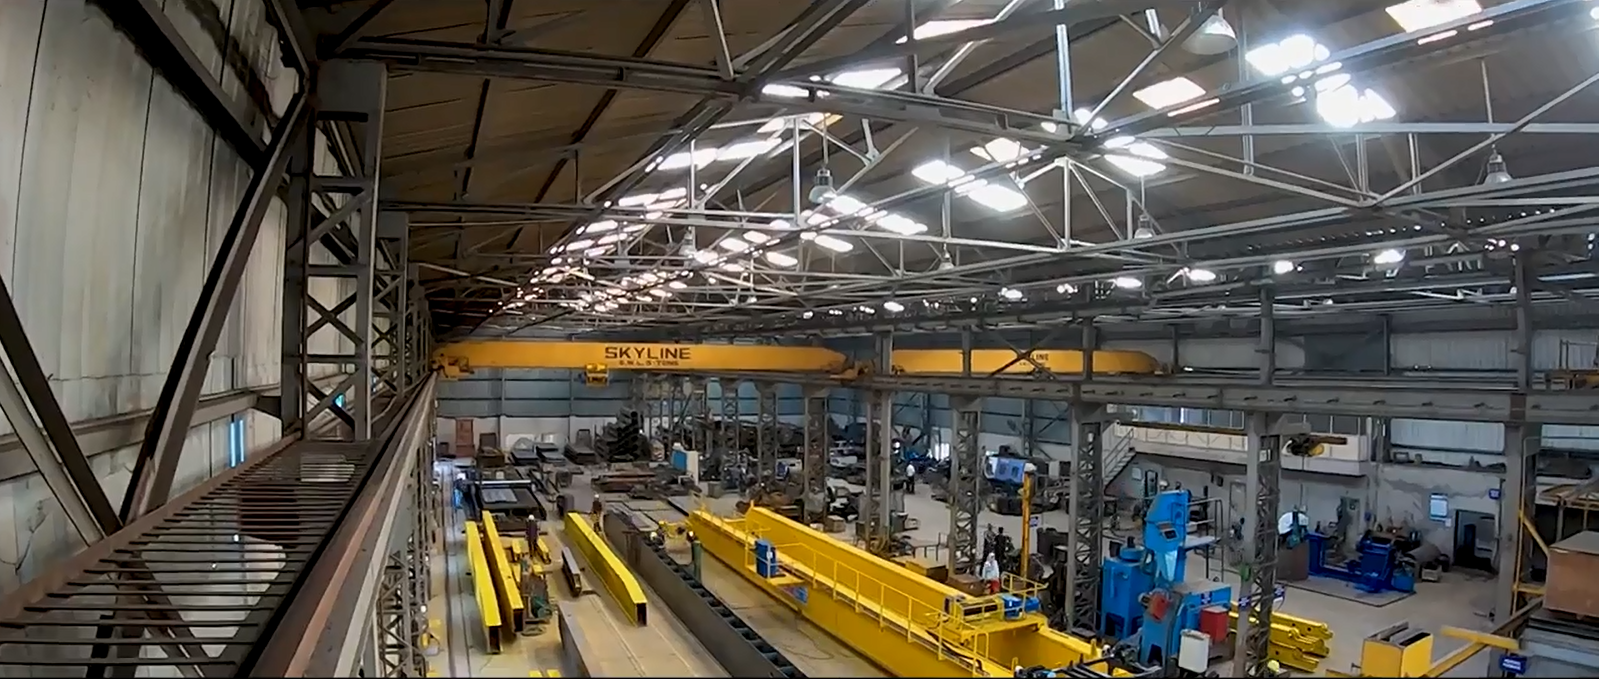 Common Problems With Overhead Cranes – Skyline Industries